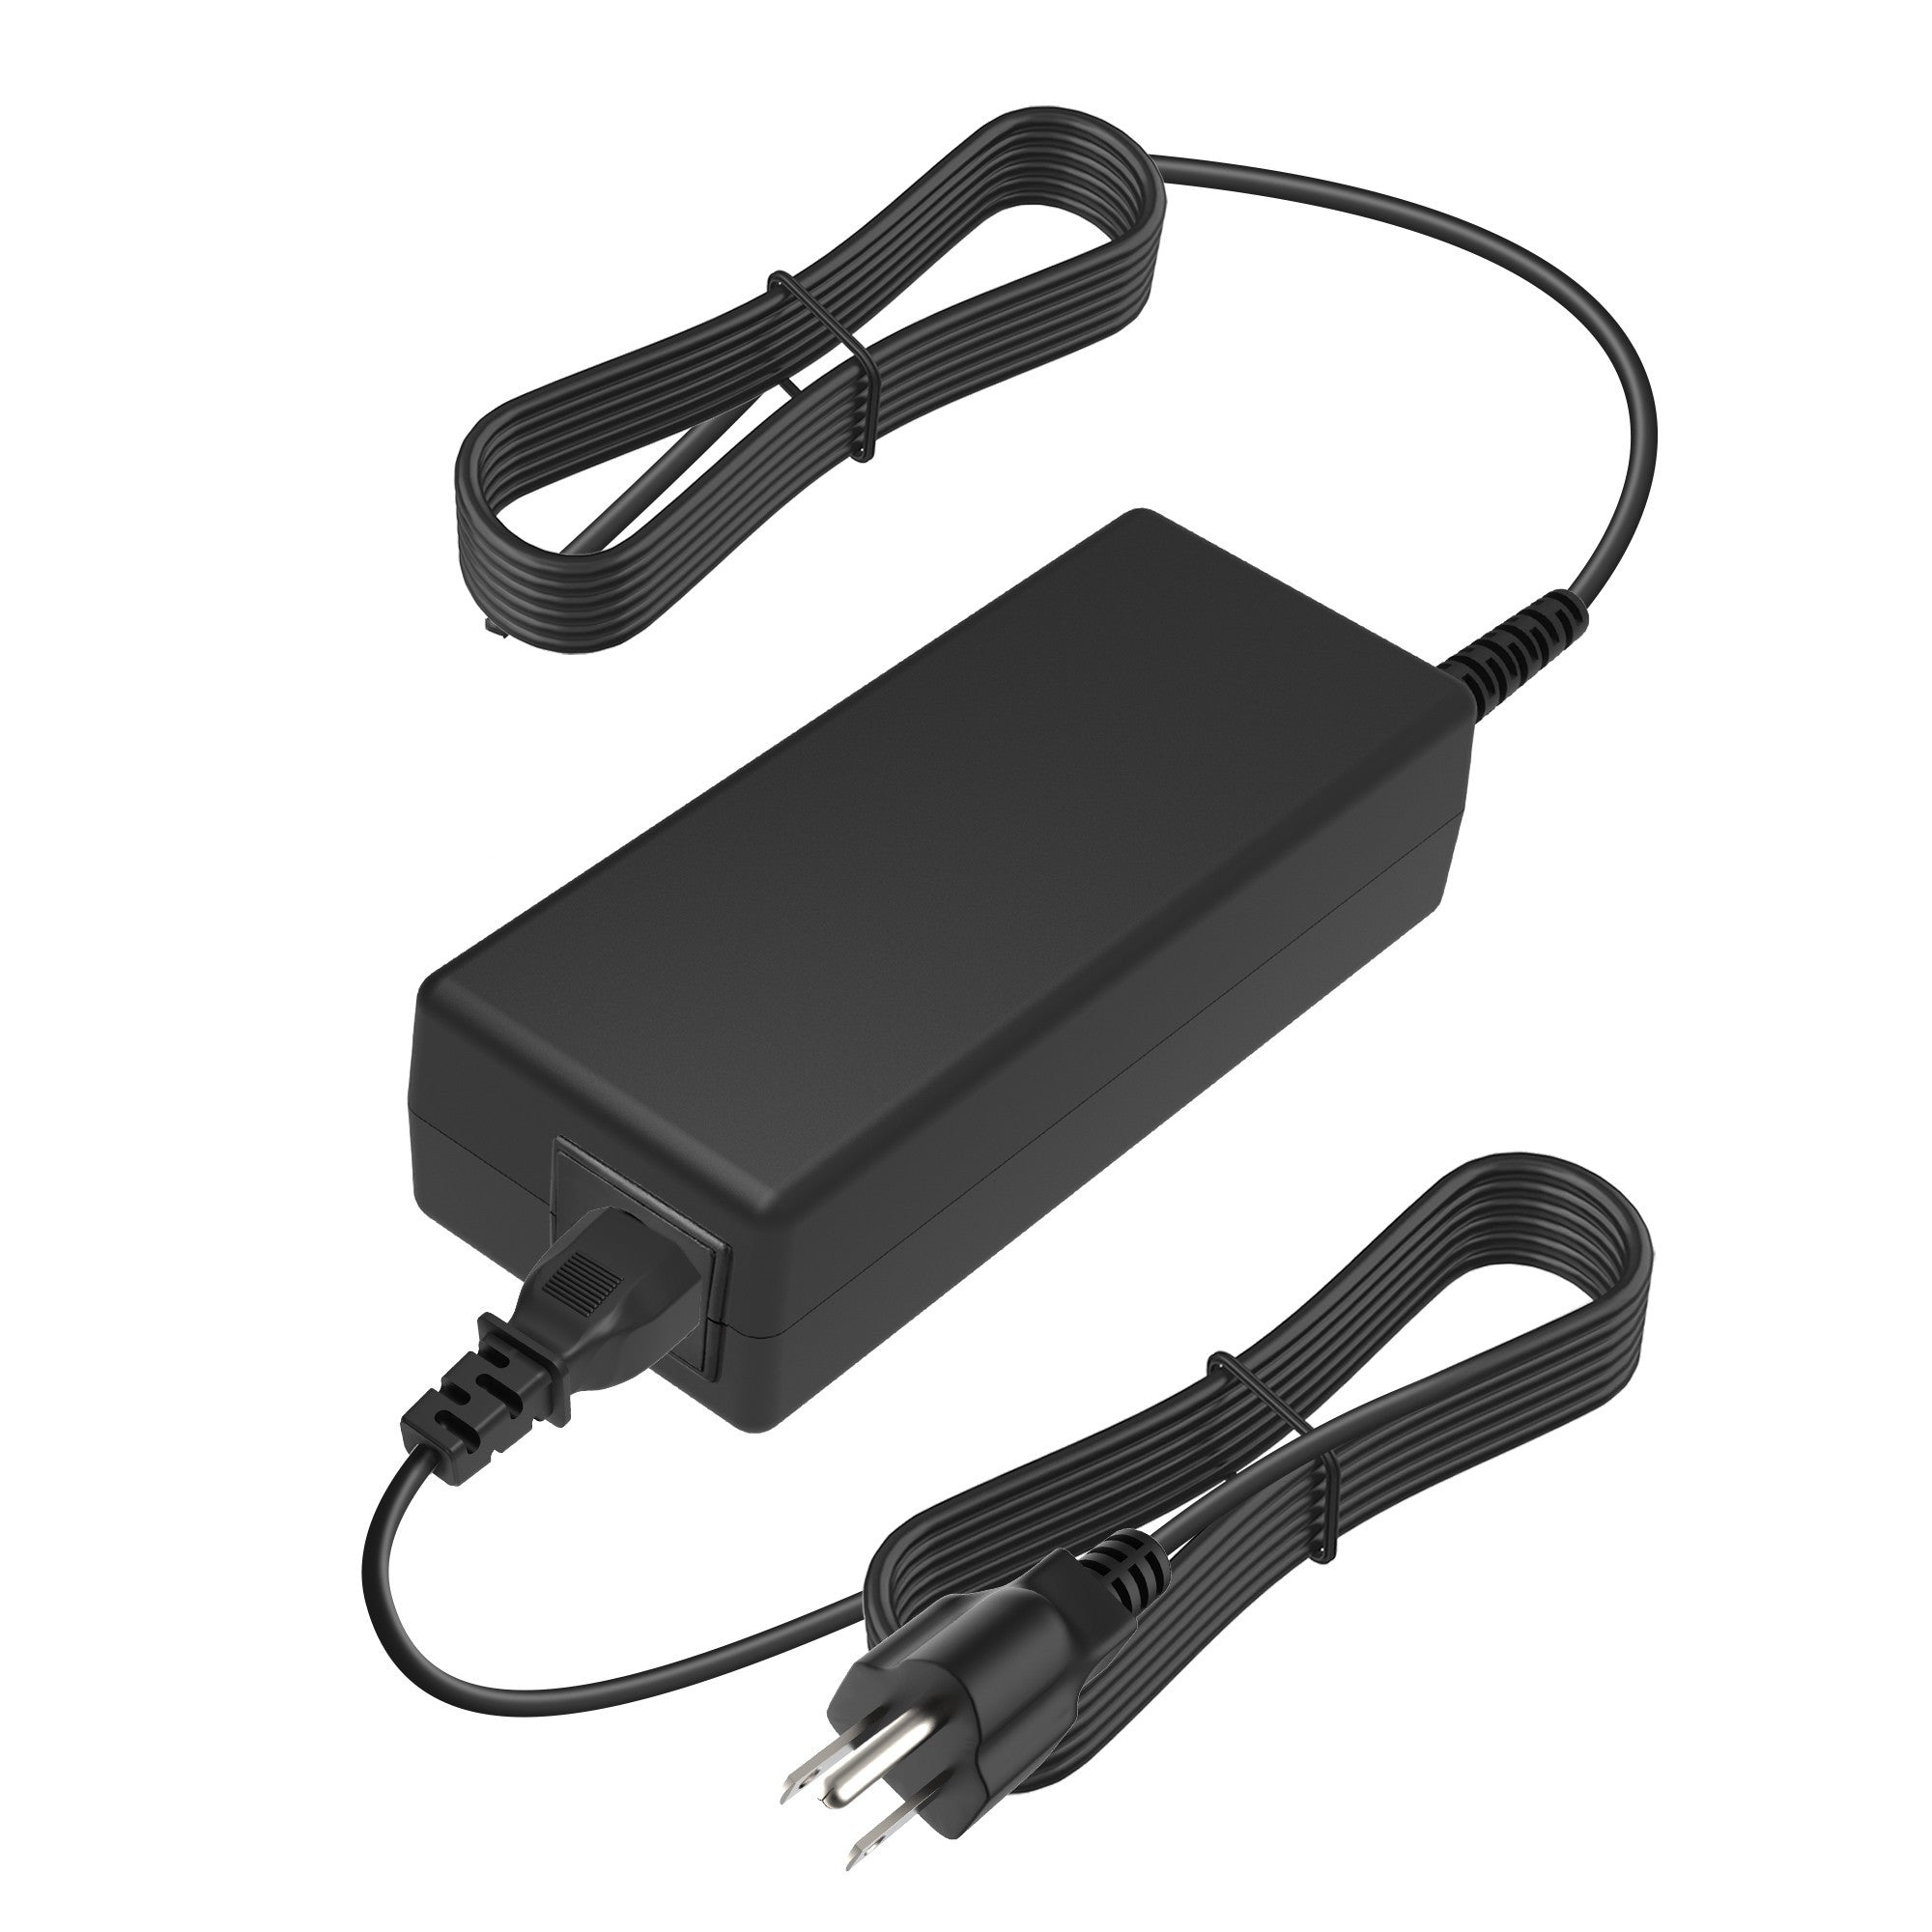 AbleGrid AC Adapter Compatible with Toshiba C660-2EF C660-114 L750-09c A135-S4467 A665-S5179 A355D-69221 ACC10 K000000550 L10-154 L10-194 L10-226 M500-ST5408 API1AD43 ADT-W61 K000004120 PSM53C-MX200F